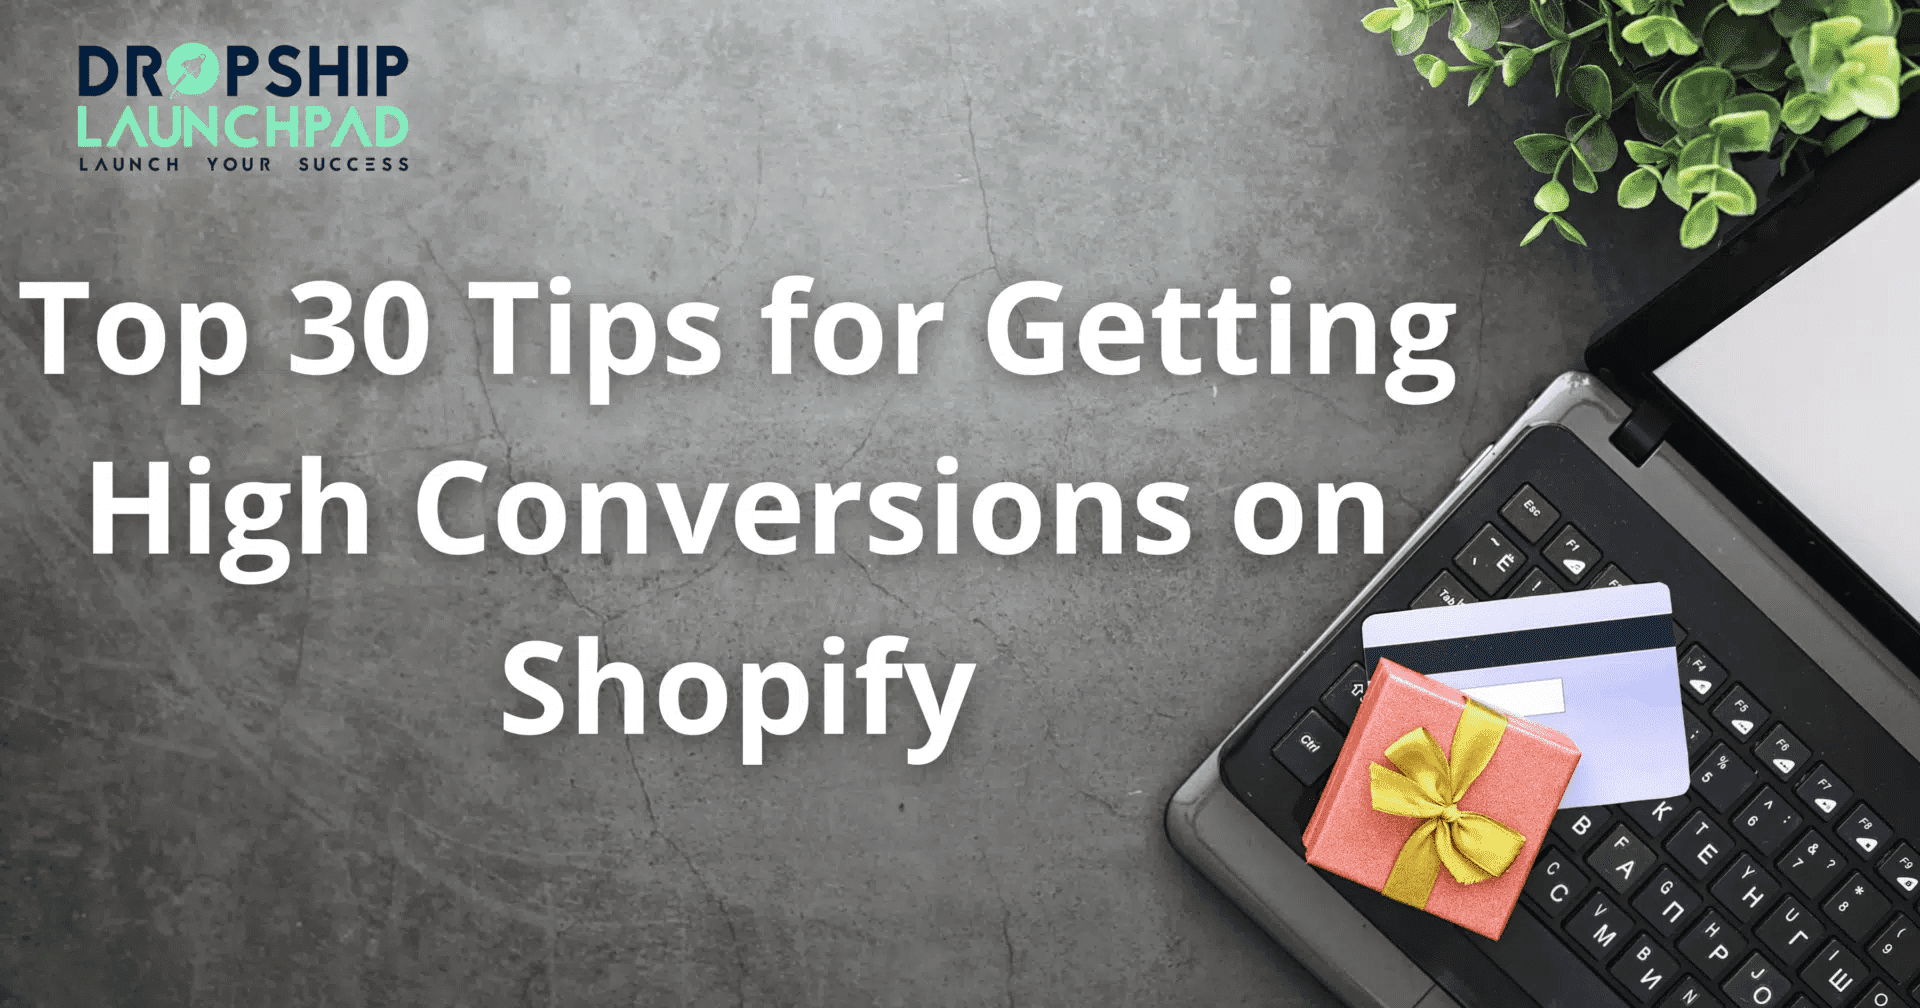 Top 30 Tips for getting high conversions on Shopify